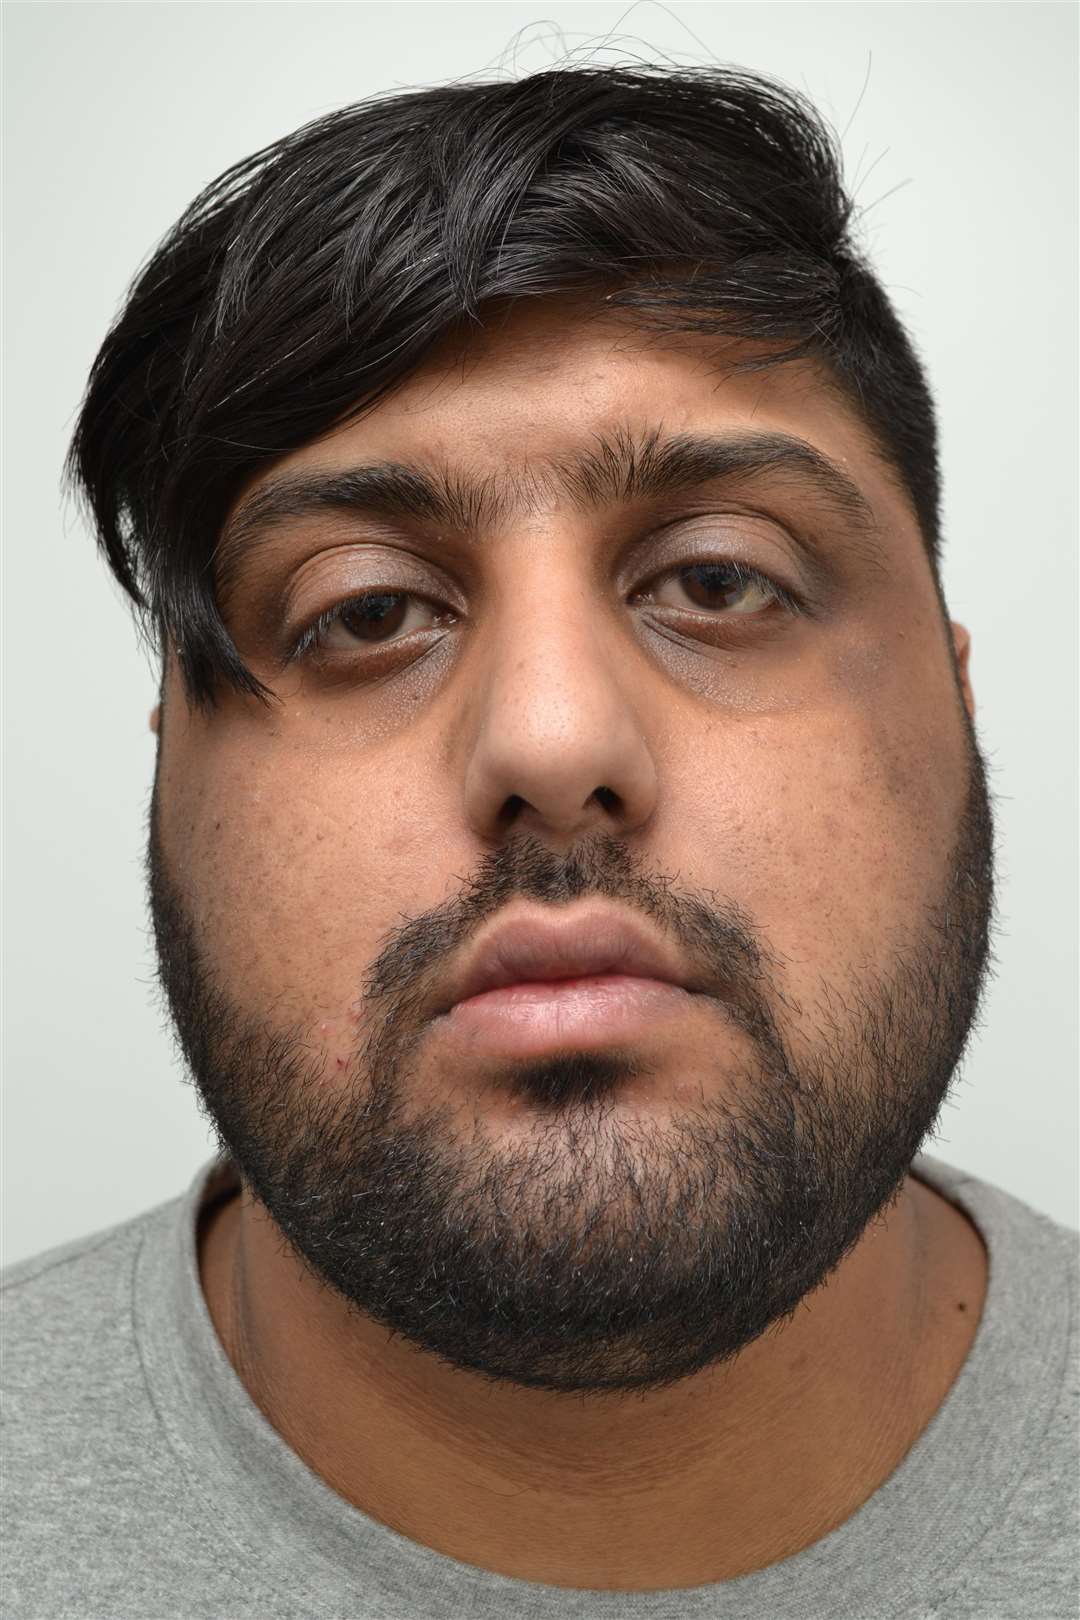 Mohammed Farooq, 28, was arrested in the grounds of St James’s Hospital in Leeds in January (Counter Terrorism Policing North East/PA)